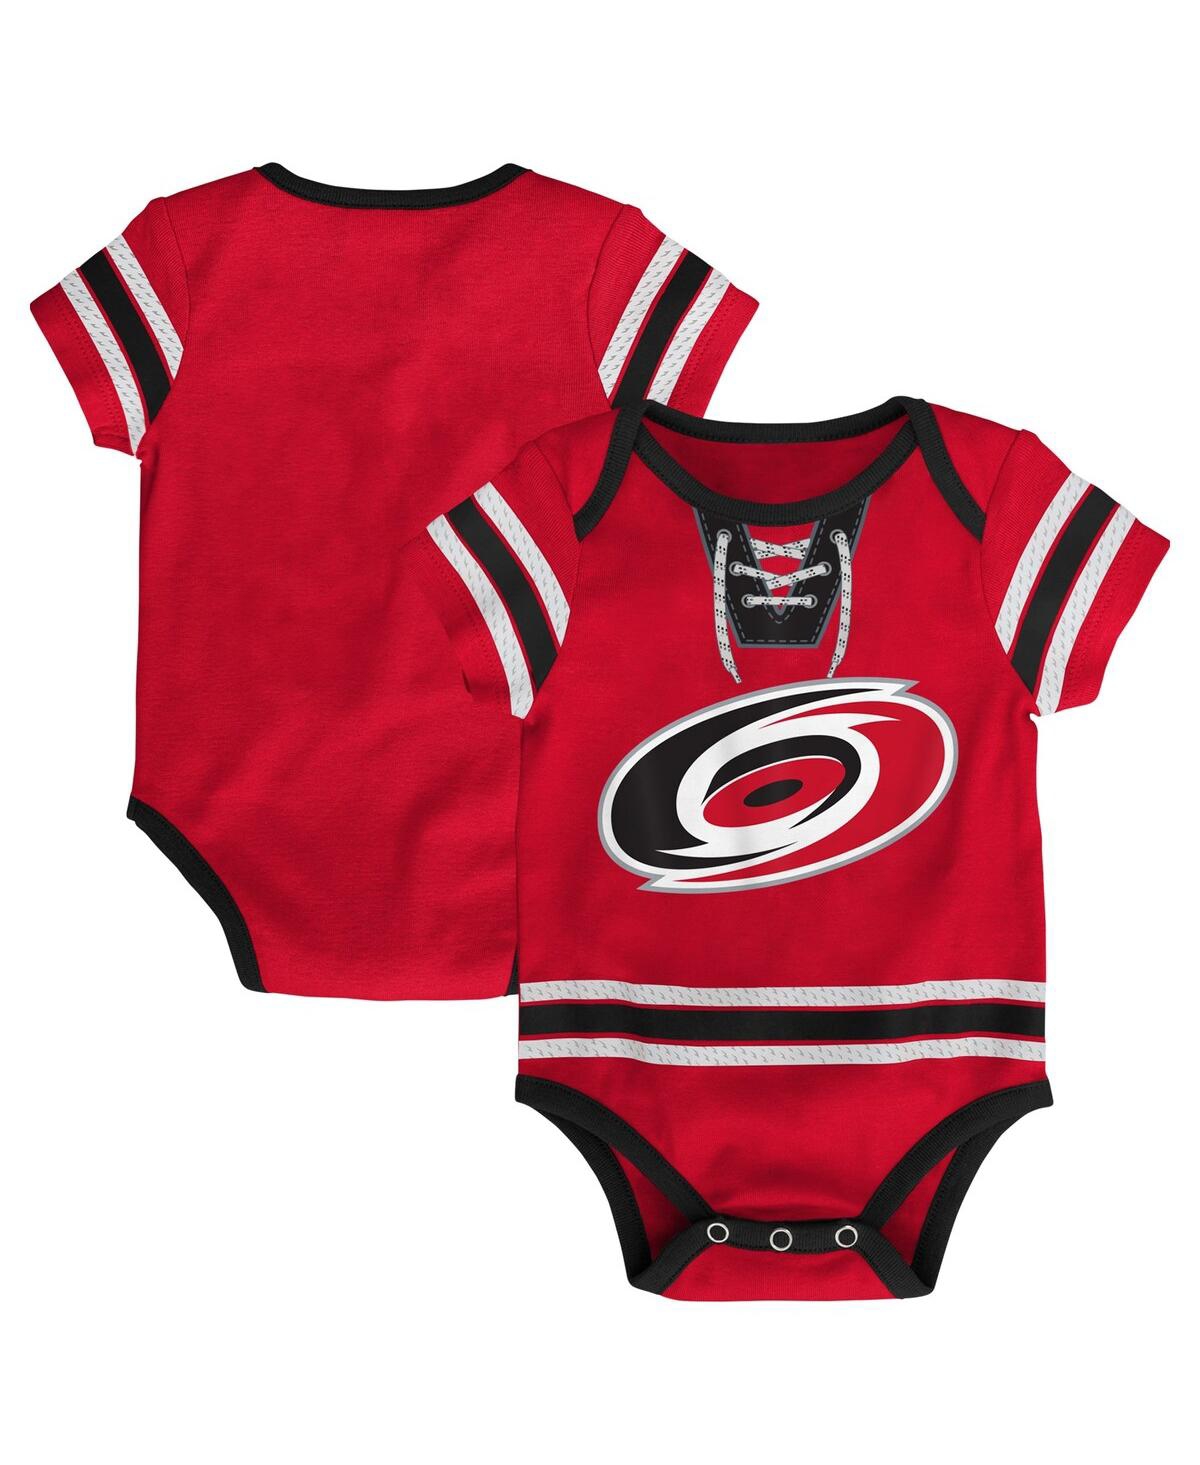 Outerstuff Babies' Infant Boys And Girls Red Carolina Hurricanes Hockey Jersey Bodysuit